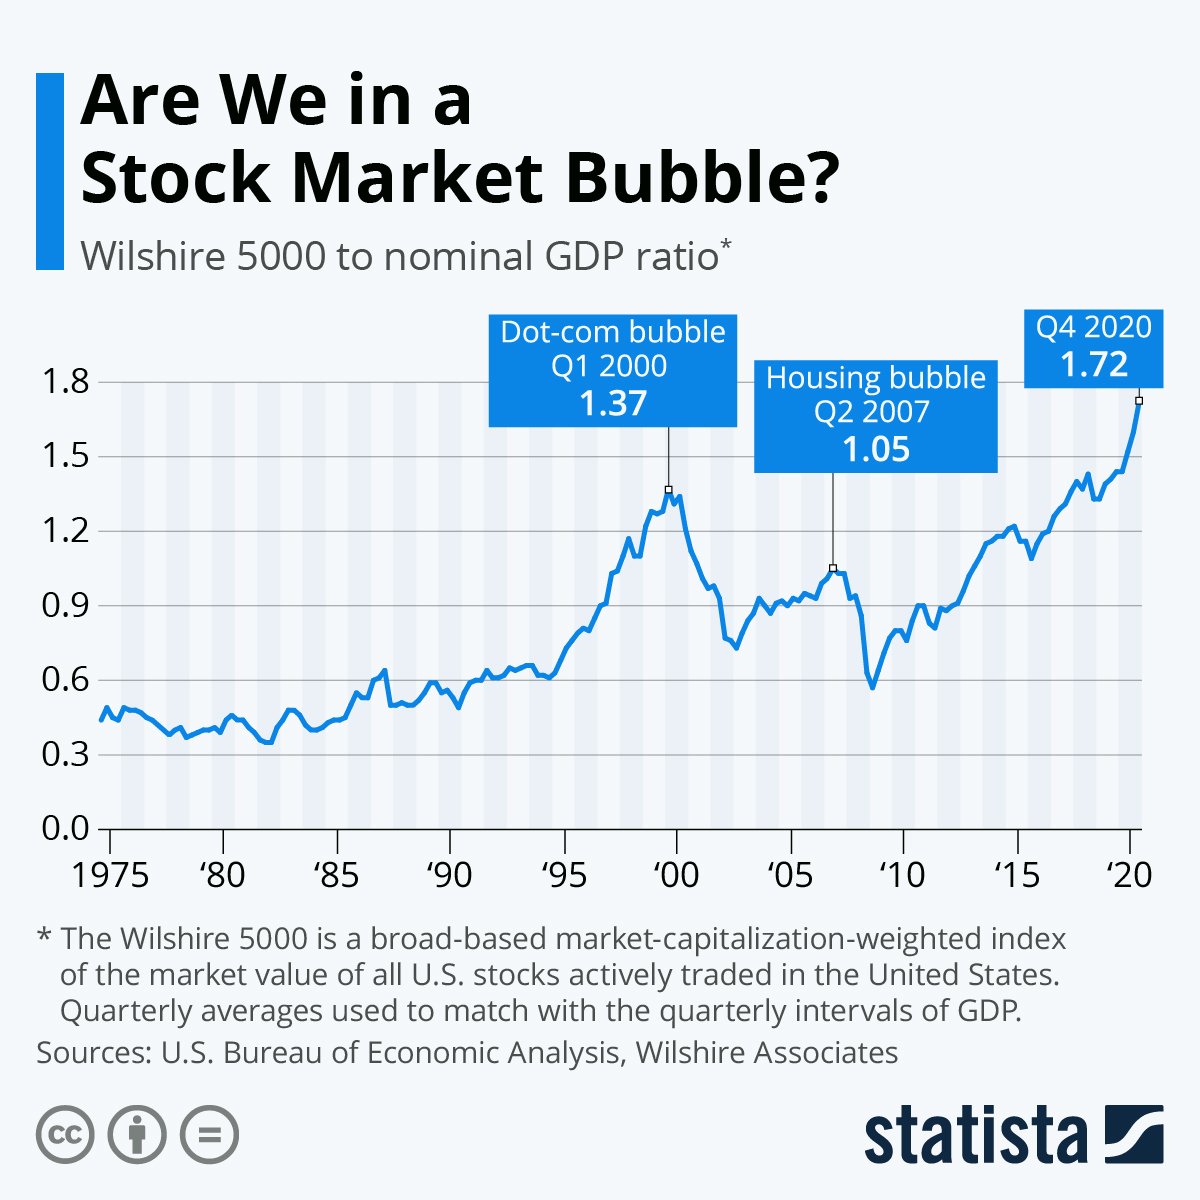 Are we in a stock market bubble?